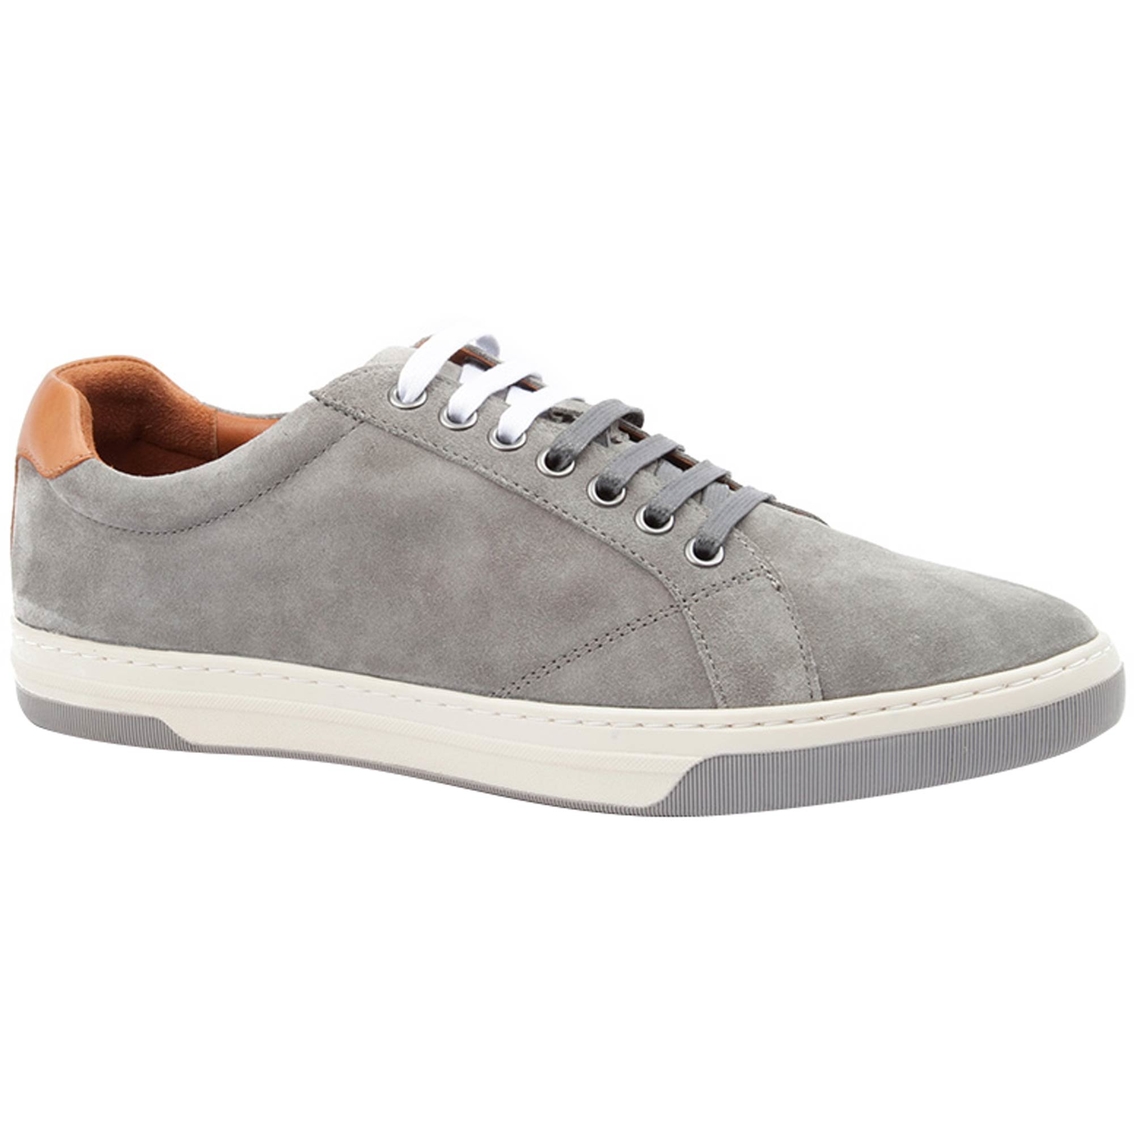 Johnston & Murphy Men's Fenton Lace To Toe Athletic Sneakers | Sneakers ...